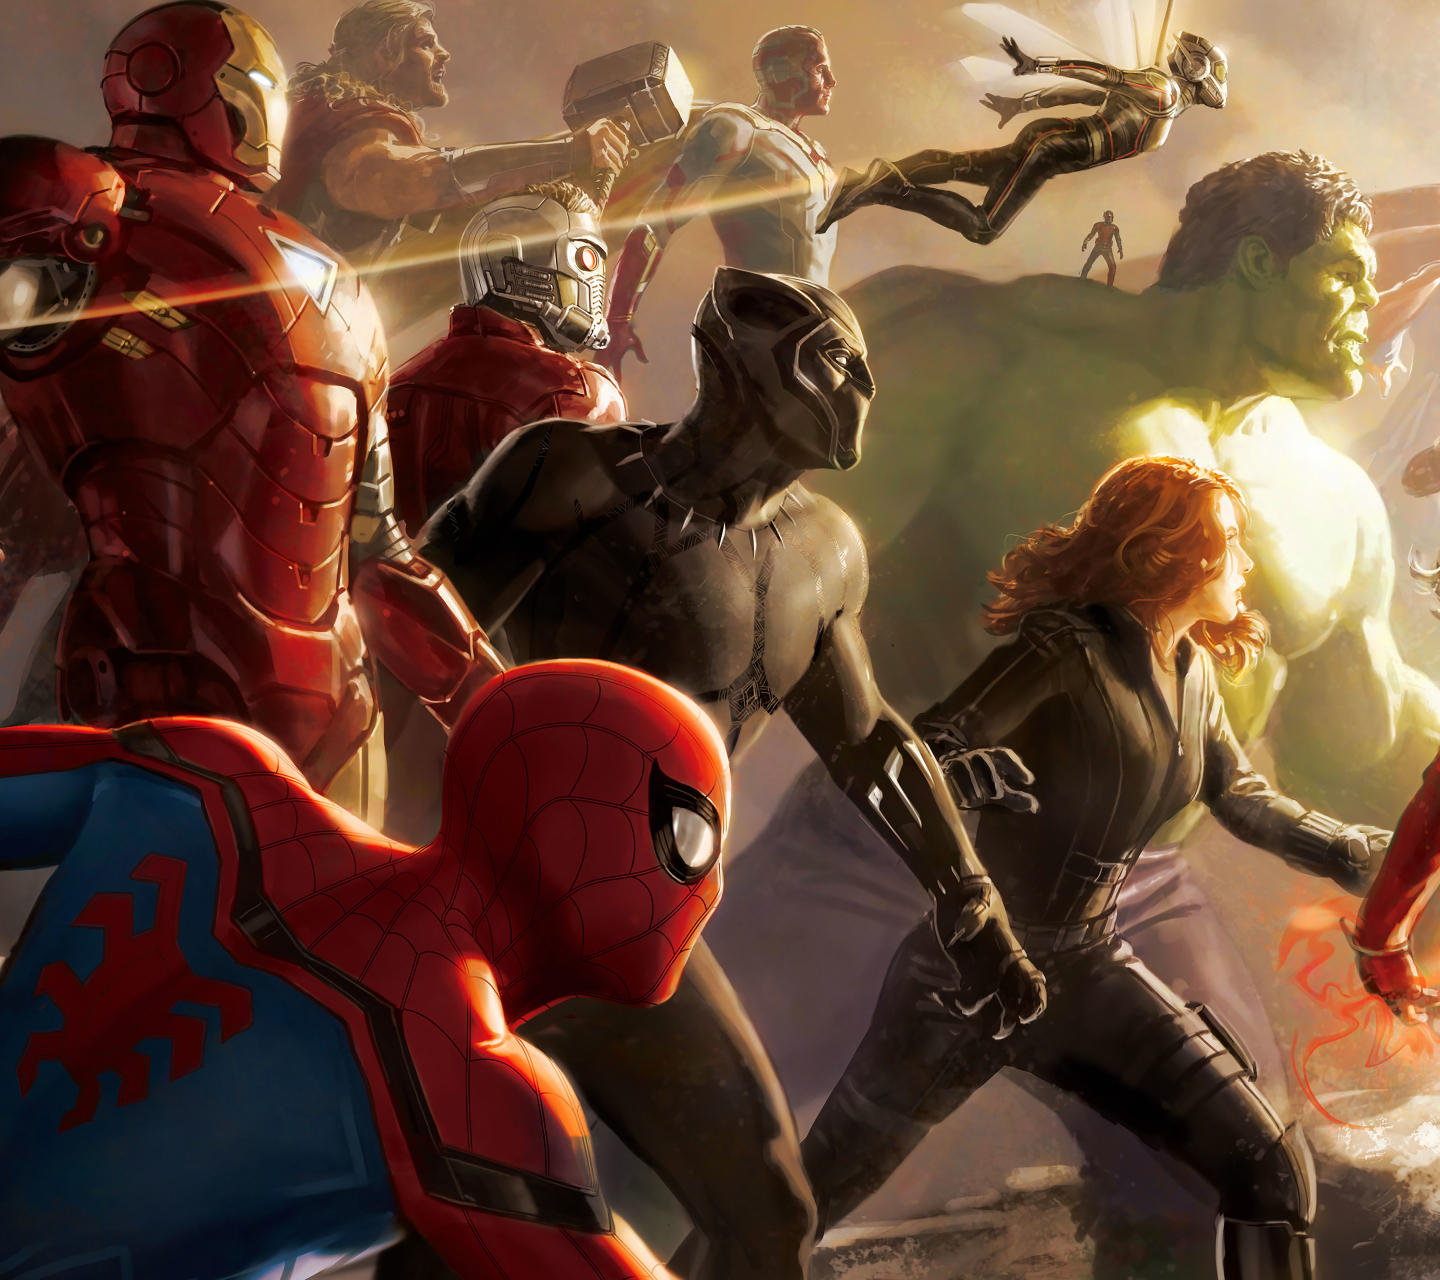 Free download wallpaper Spider Man, Hulk, Iron Man, Movie, Wasp (Marvel Comics), Thor, Black Widow, Vision (Marvel Comics), The Avengers, Star Lord, Ant Man, Black Panther (Movie), Avengers: Infinity War on your PC desktop